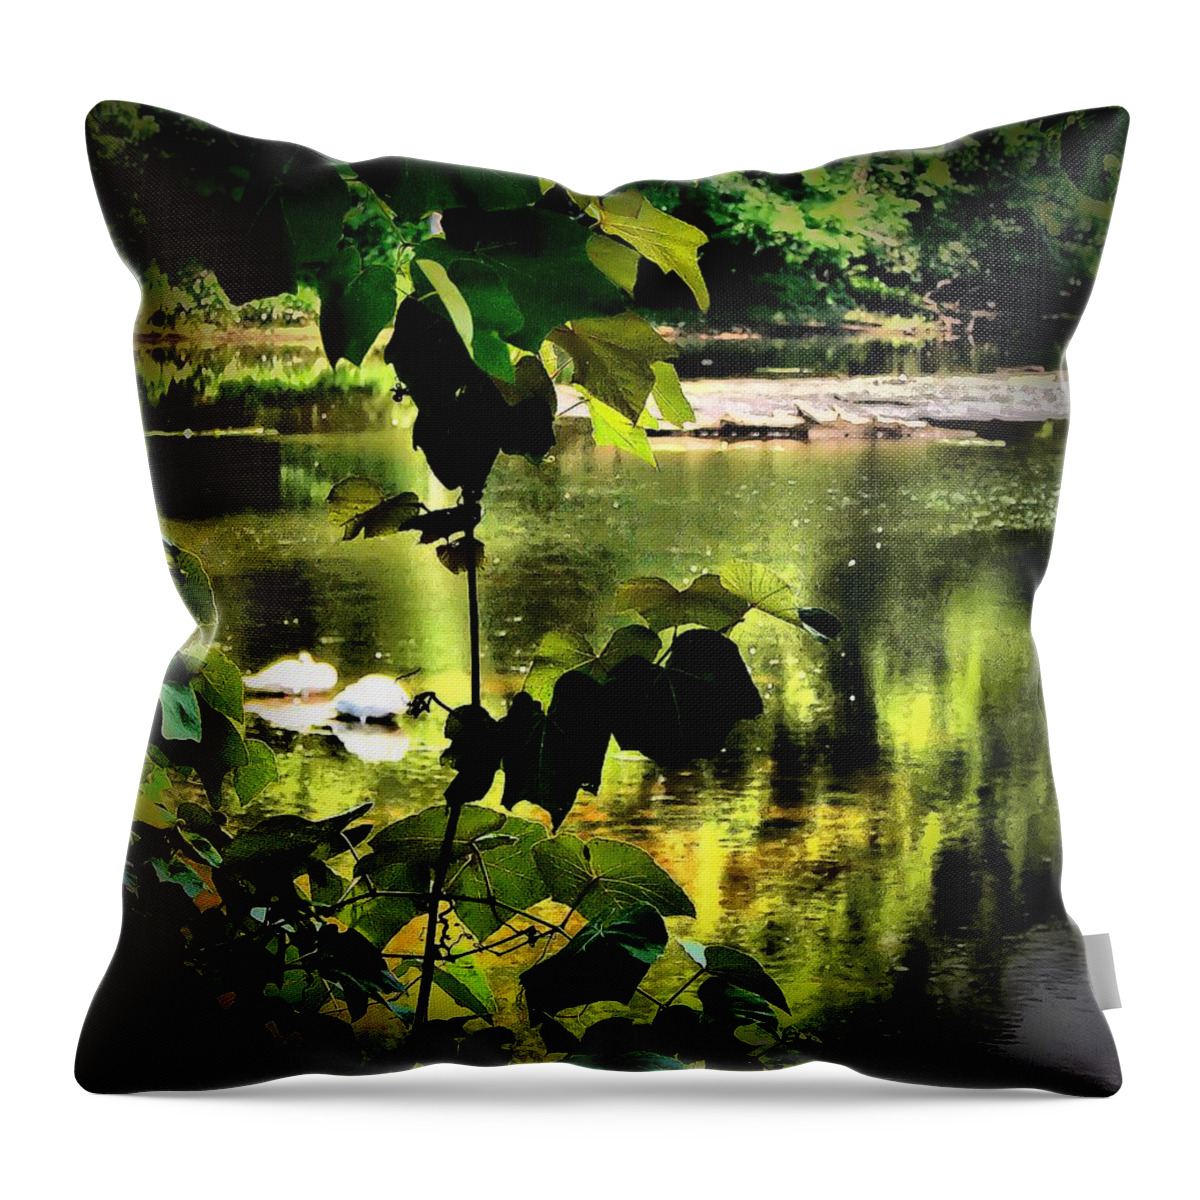 Animals Throw Pillow featuring the photograph Swan Dive by Robert McCubbin